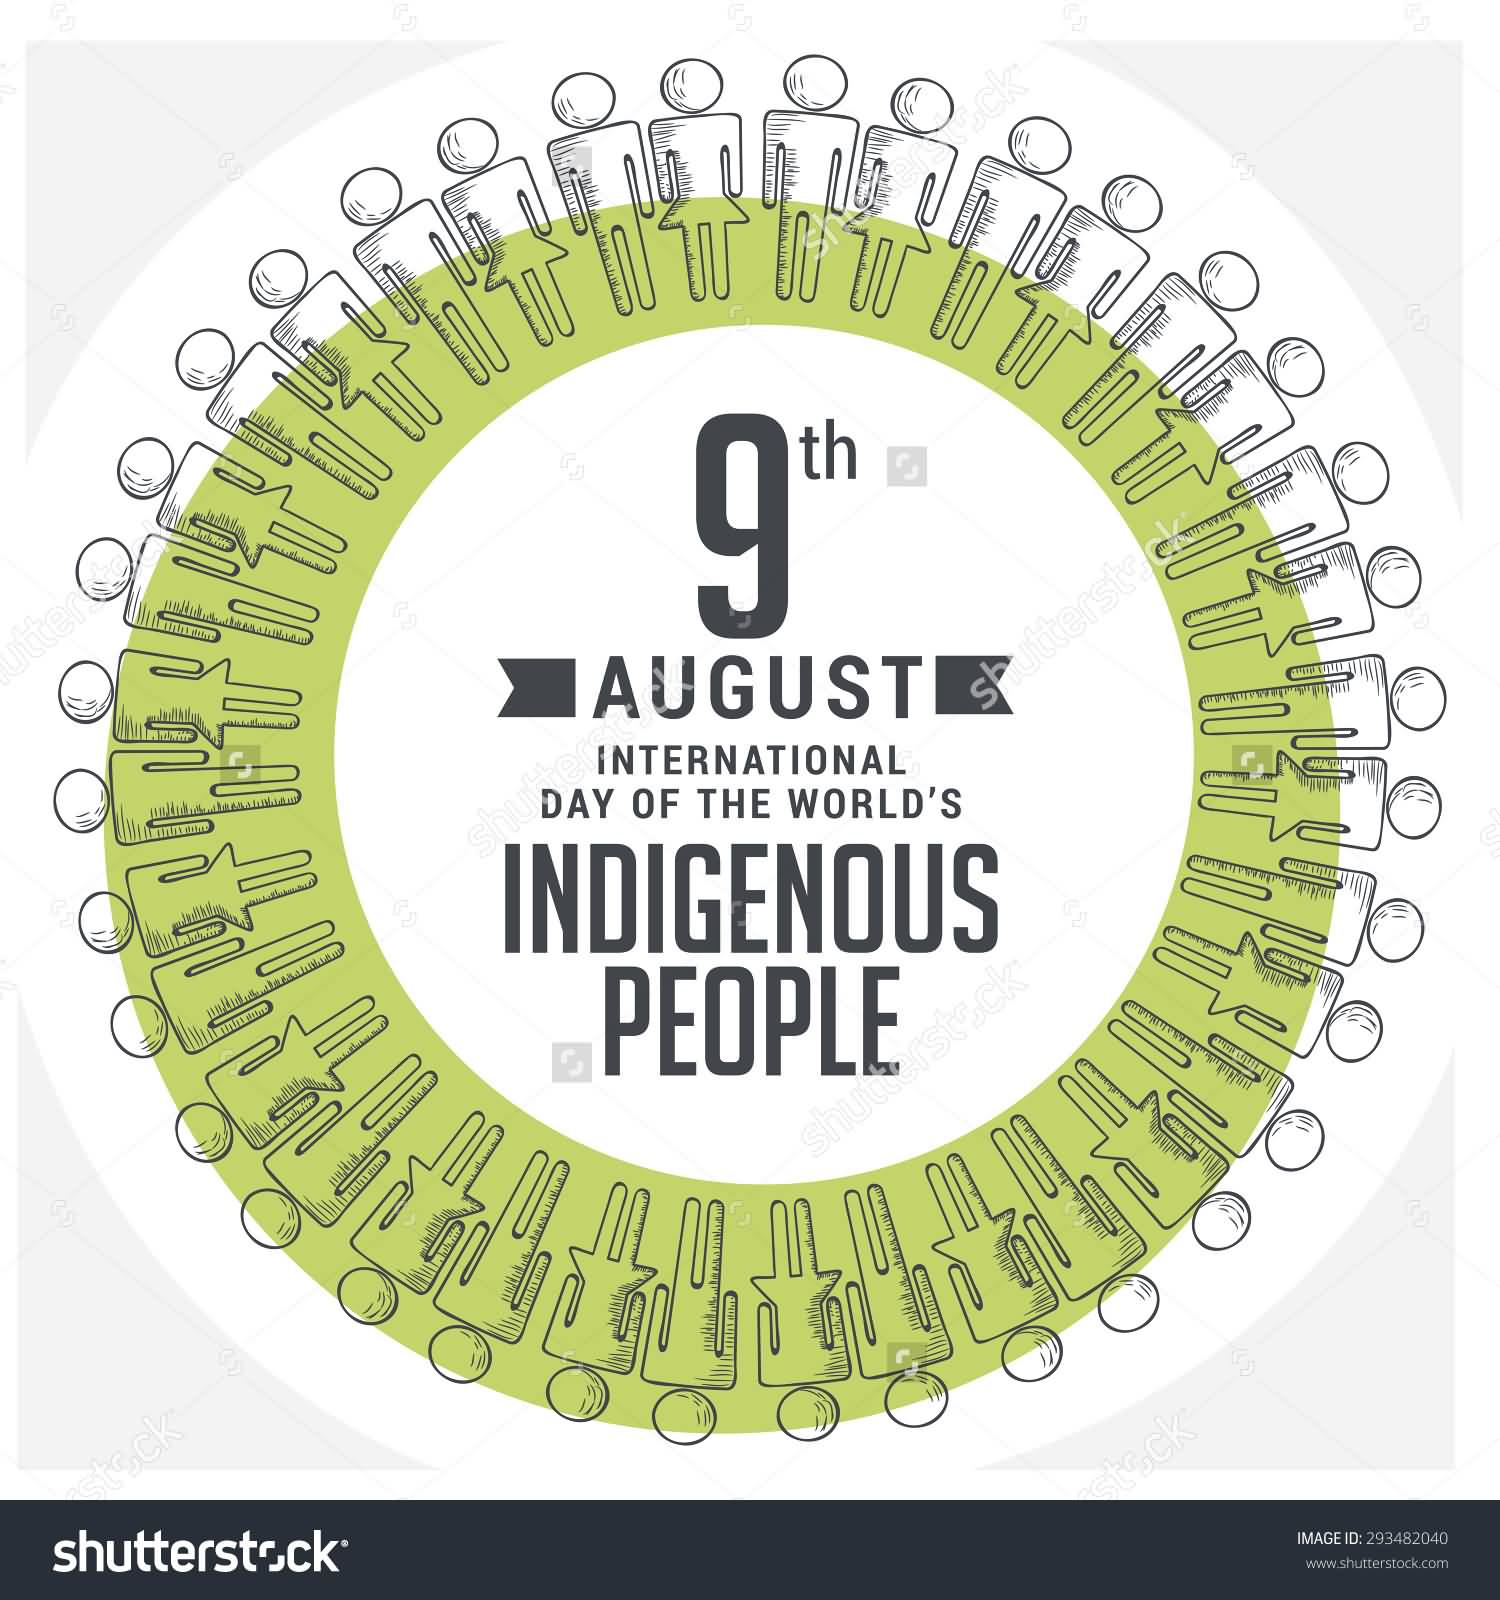 9th August International Day of the World’s Indigenous Peoples Illustration